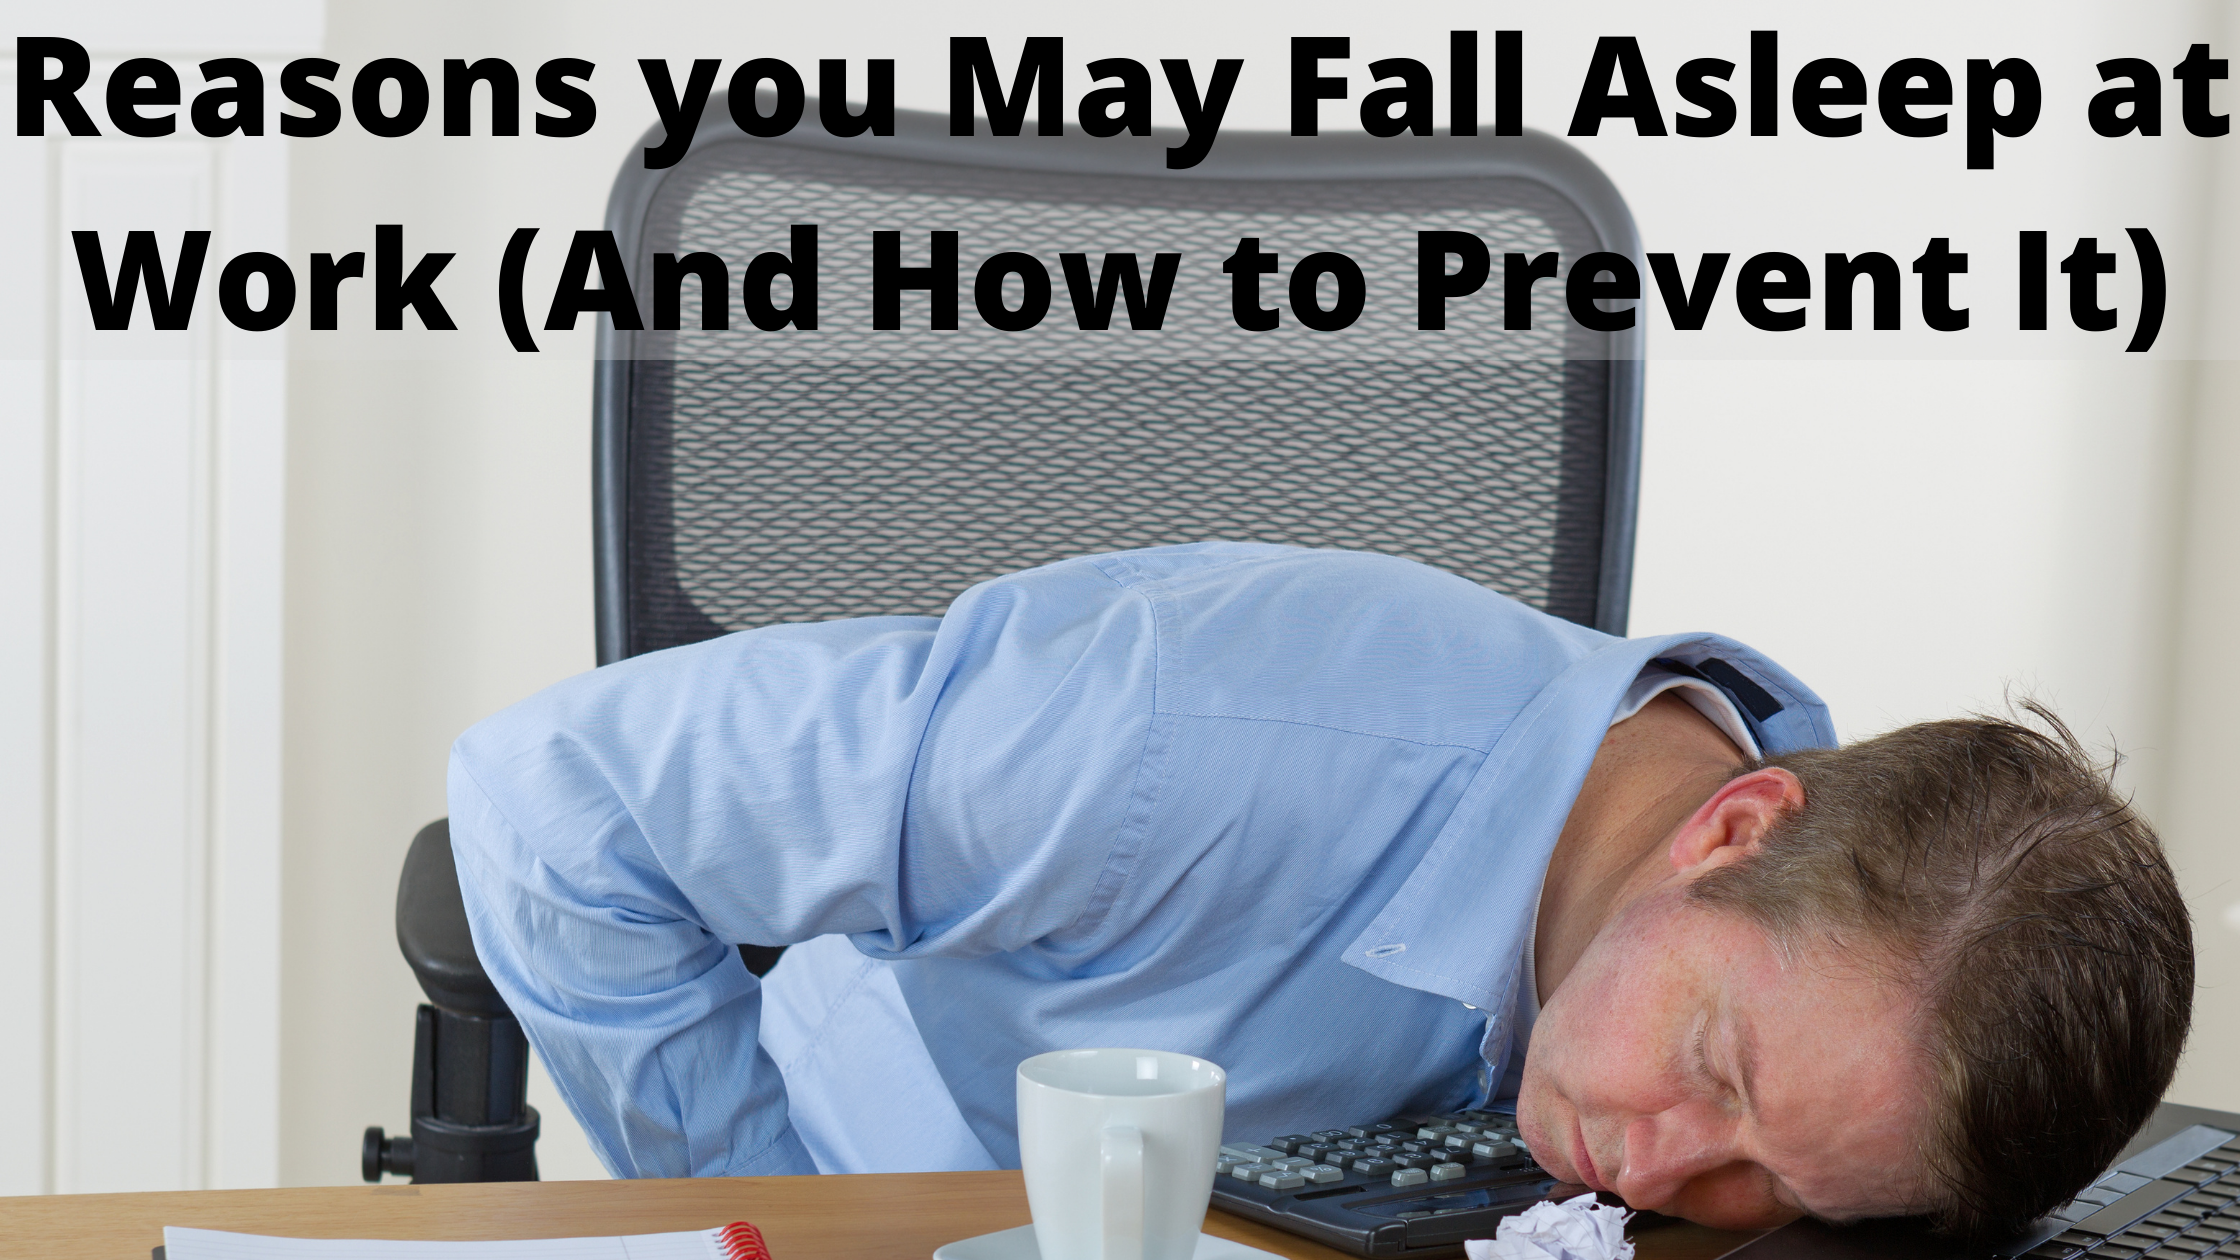 Reasons you May Fall Asleep at Work (And How to Prevent It)